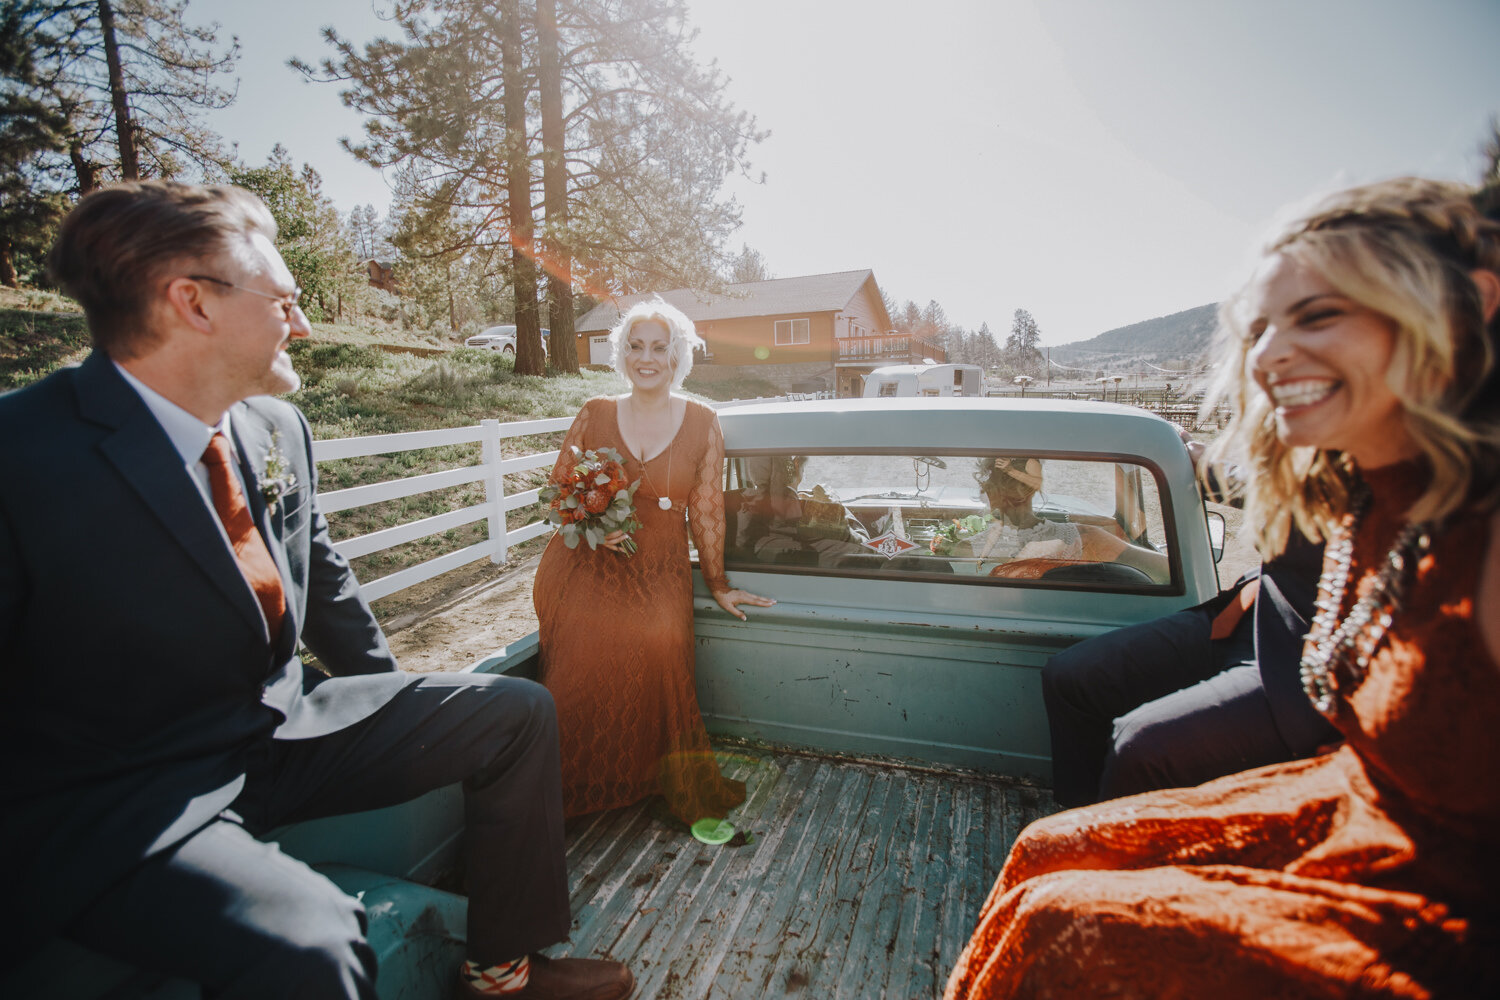 Bridal party rising in the back of a vintage pickup truck on the way to an intimate wedding ceremony in Califronia